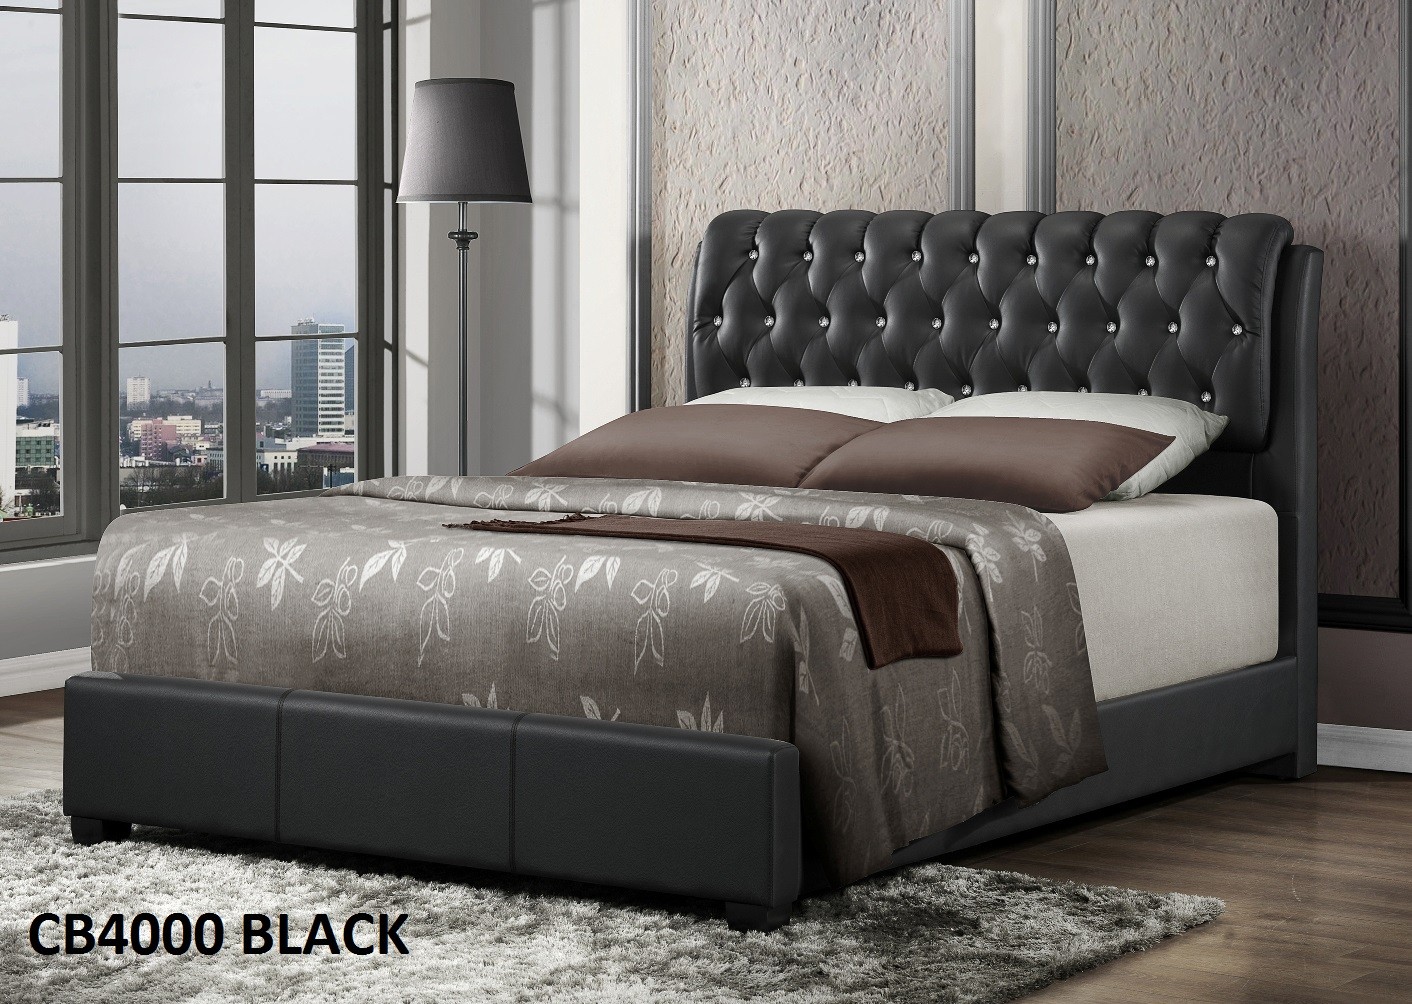 Bed Frame Queen | We have great variety of furniture in Las Vegas Nevada